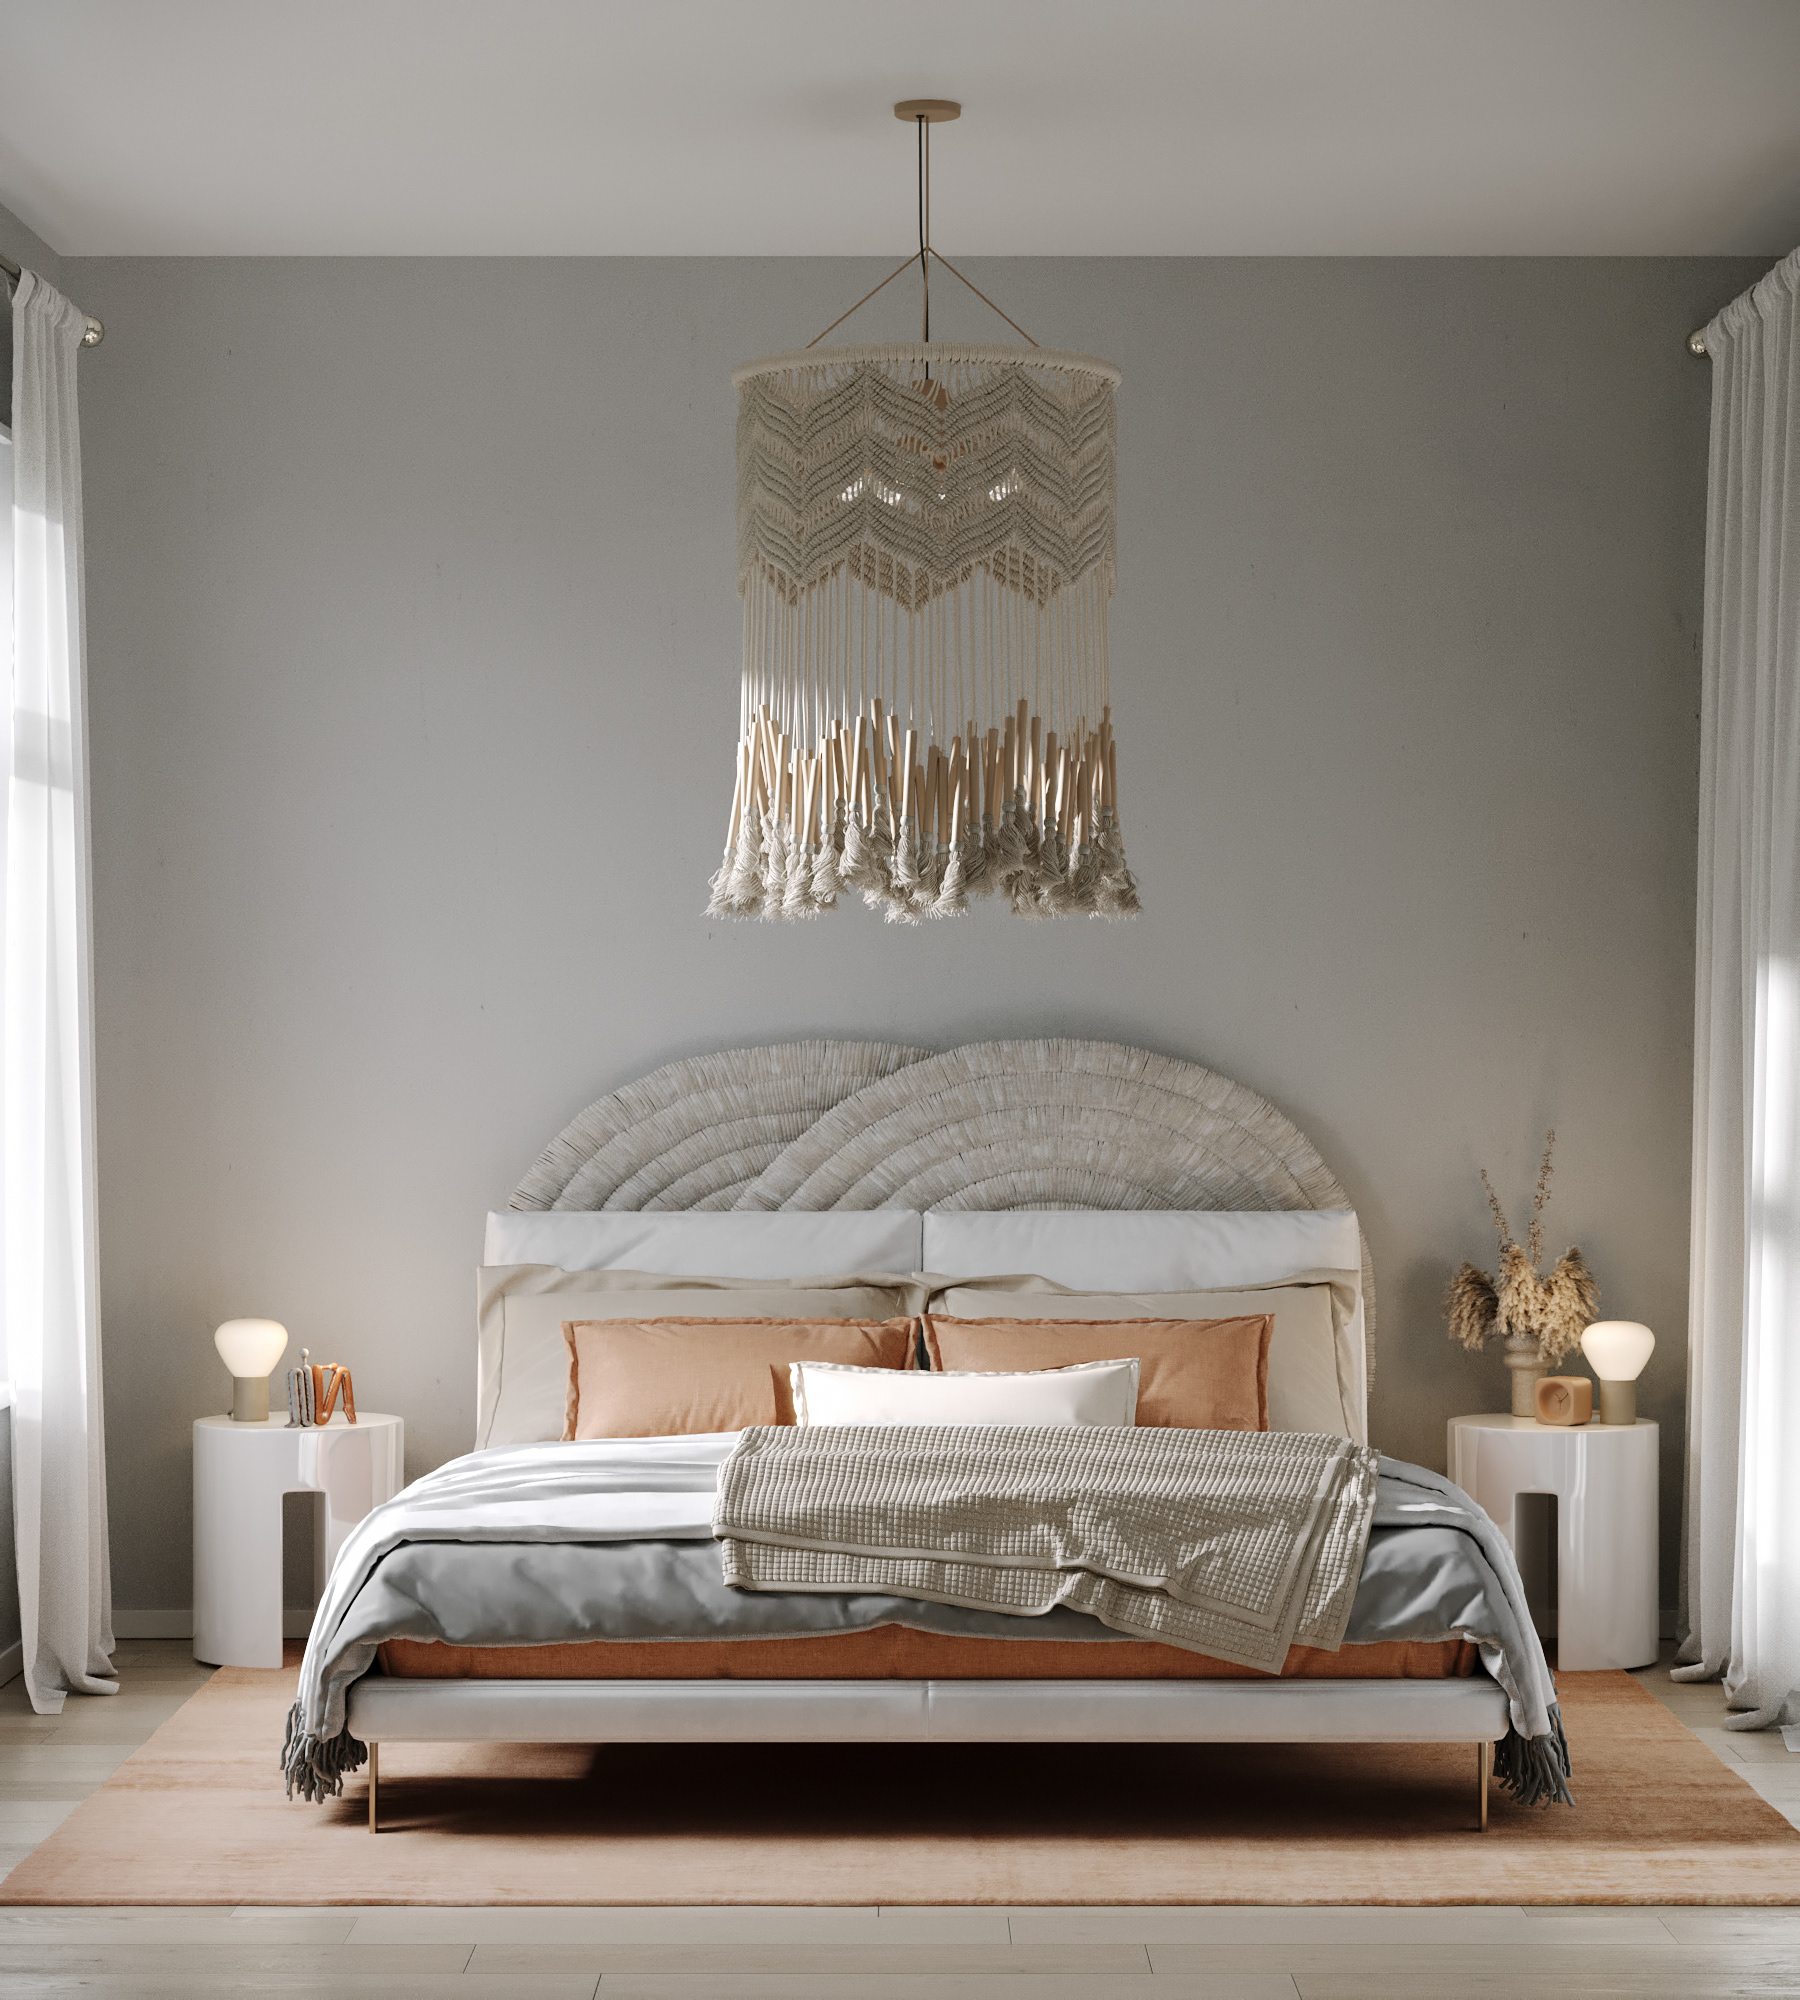 This spacious bedroom is made into a simple but lovely space by using a warm tone as the primary color, light gray wall paint, and basic furniture. Natural sunshine can go through the window and white curtain to brighten up the room.